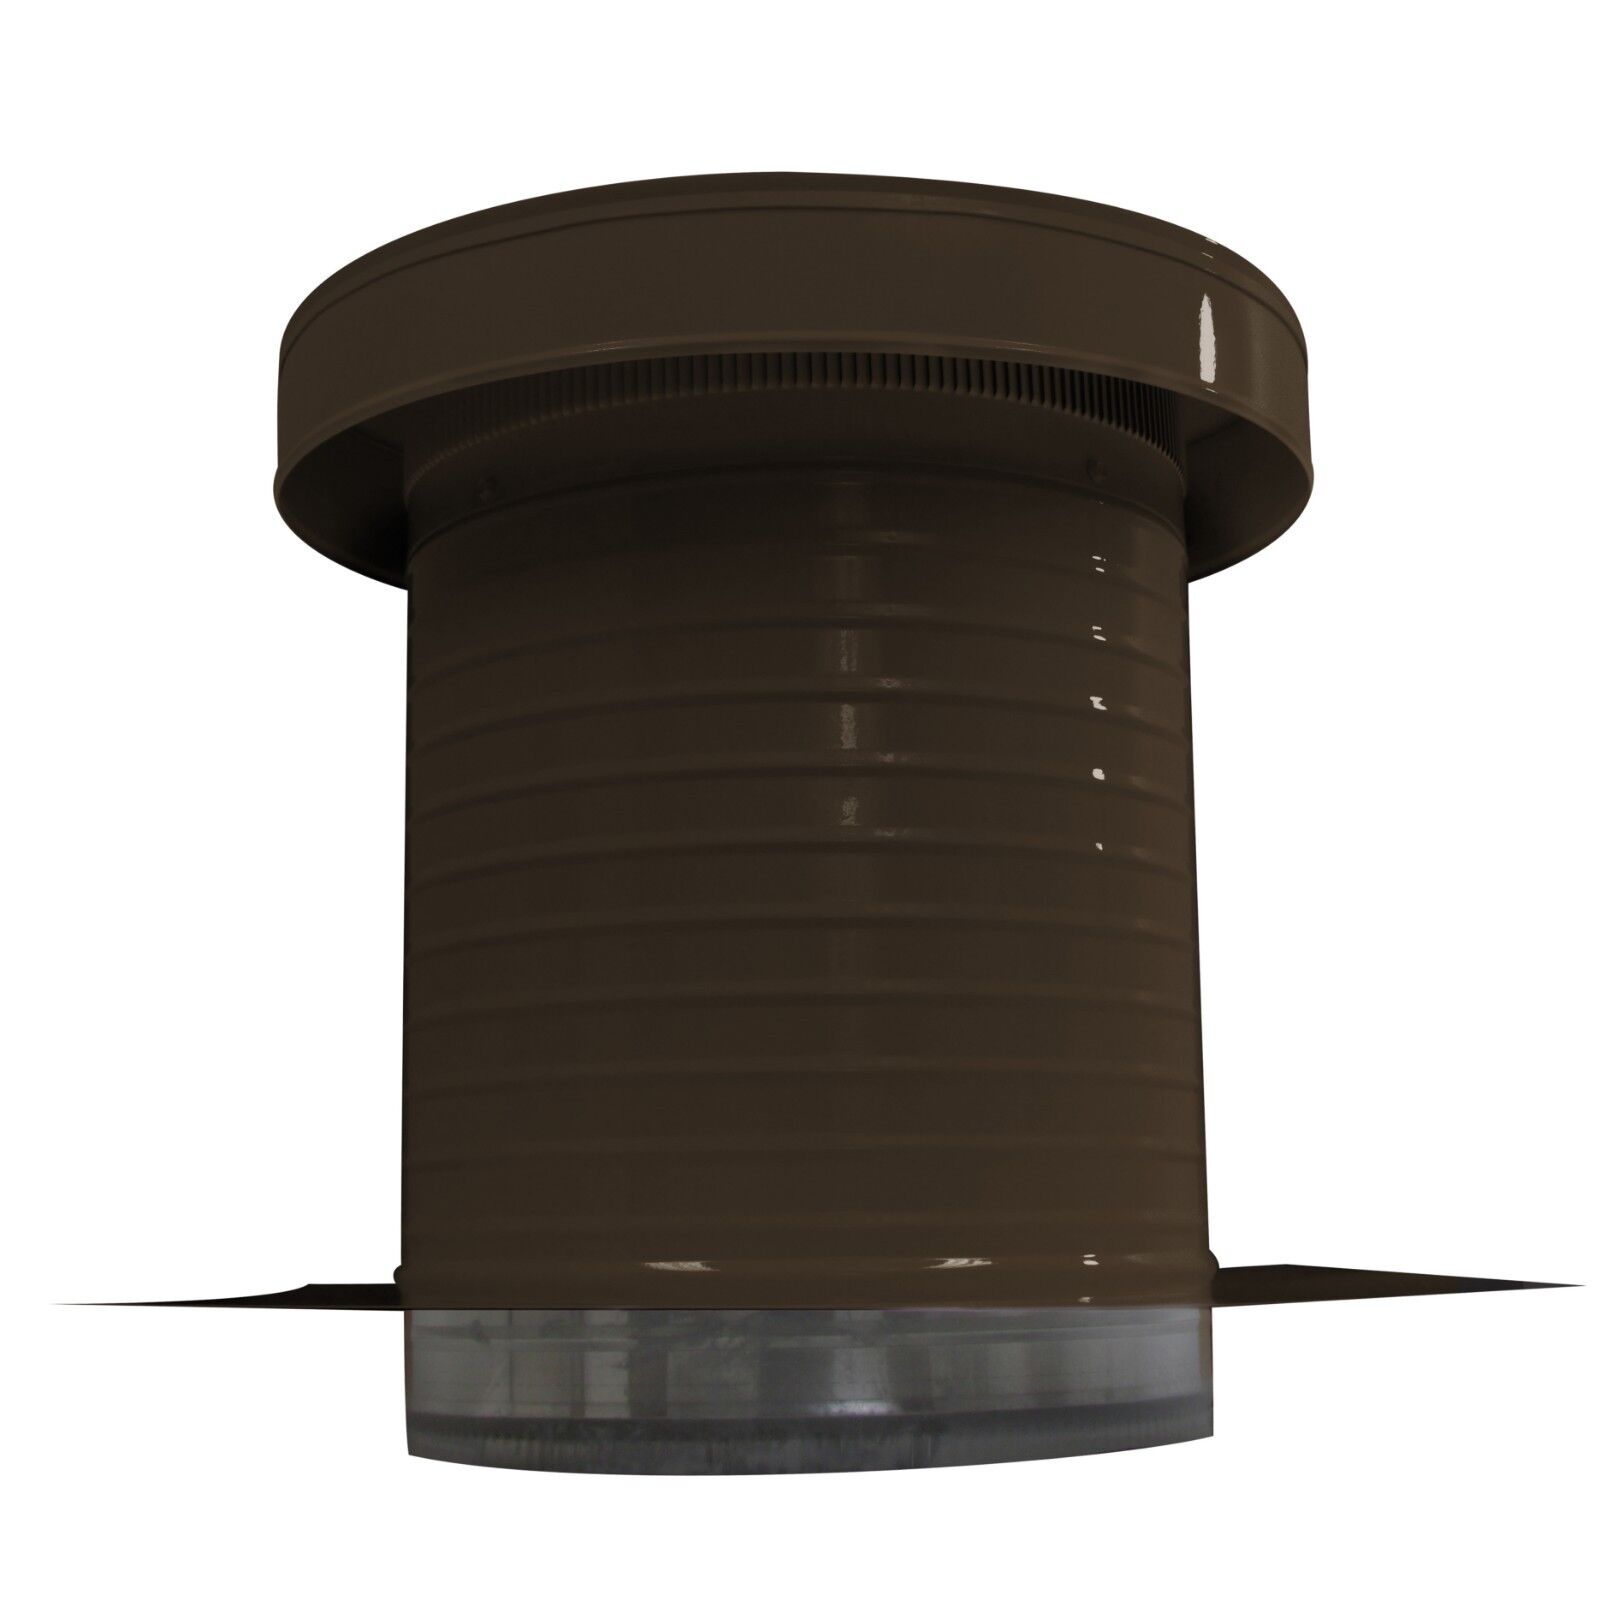 12 inch diameter Aluminum Keepa Roof Jack Vent Cap with Tail Pipe in Brown